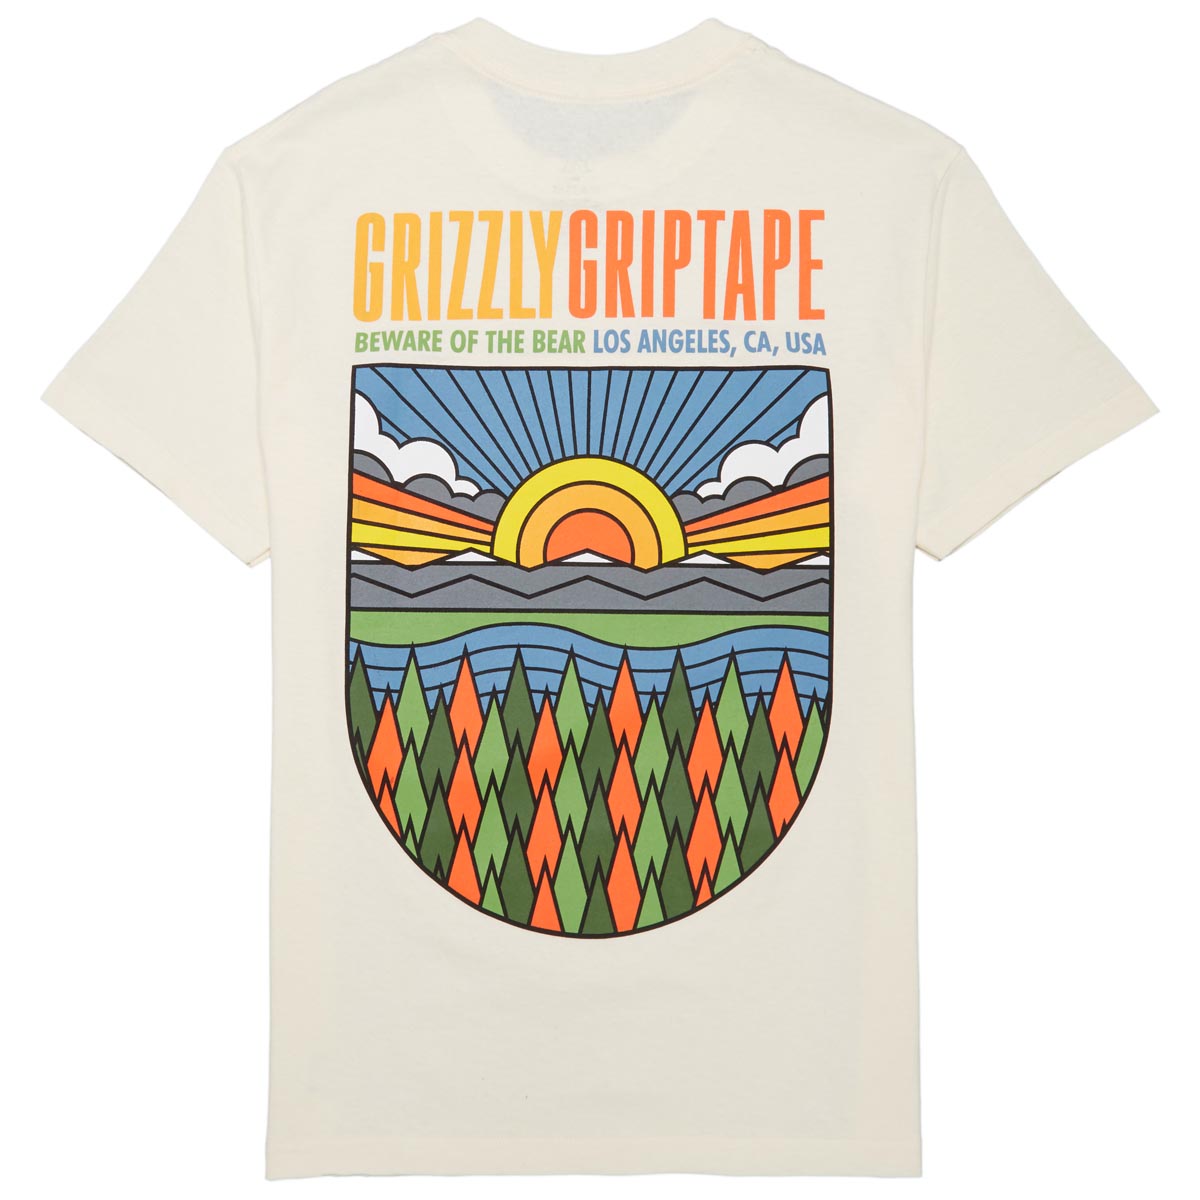 Grizzly Sun Valley T-Shirt - Cream image 1